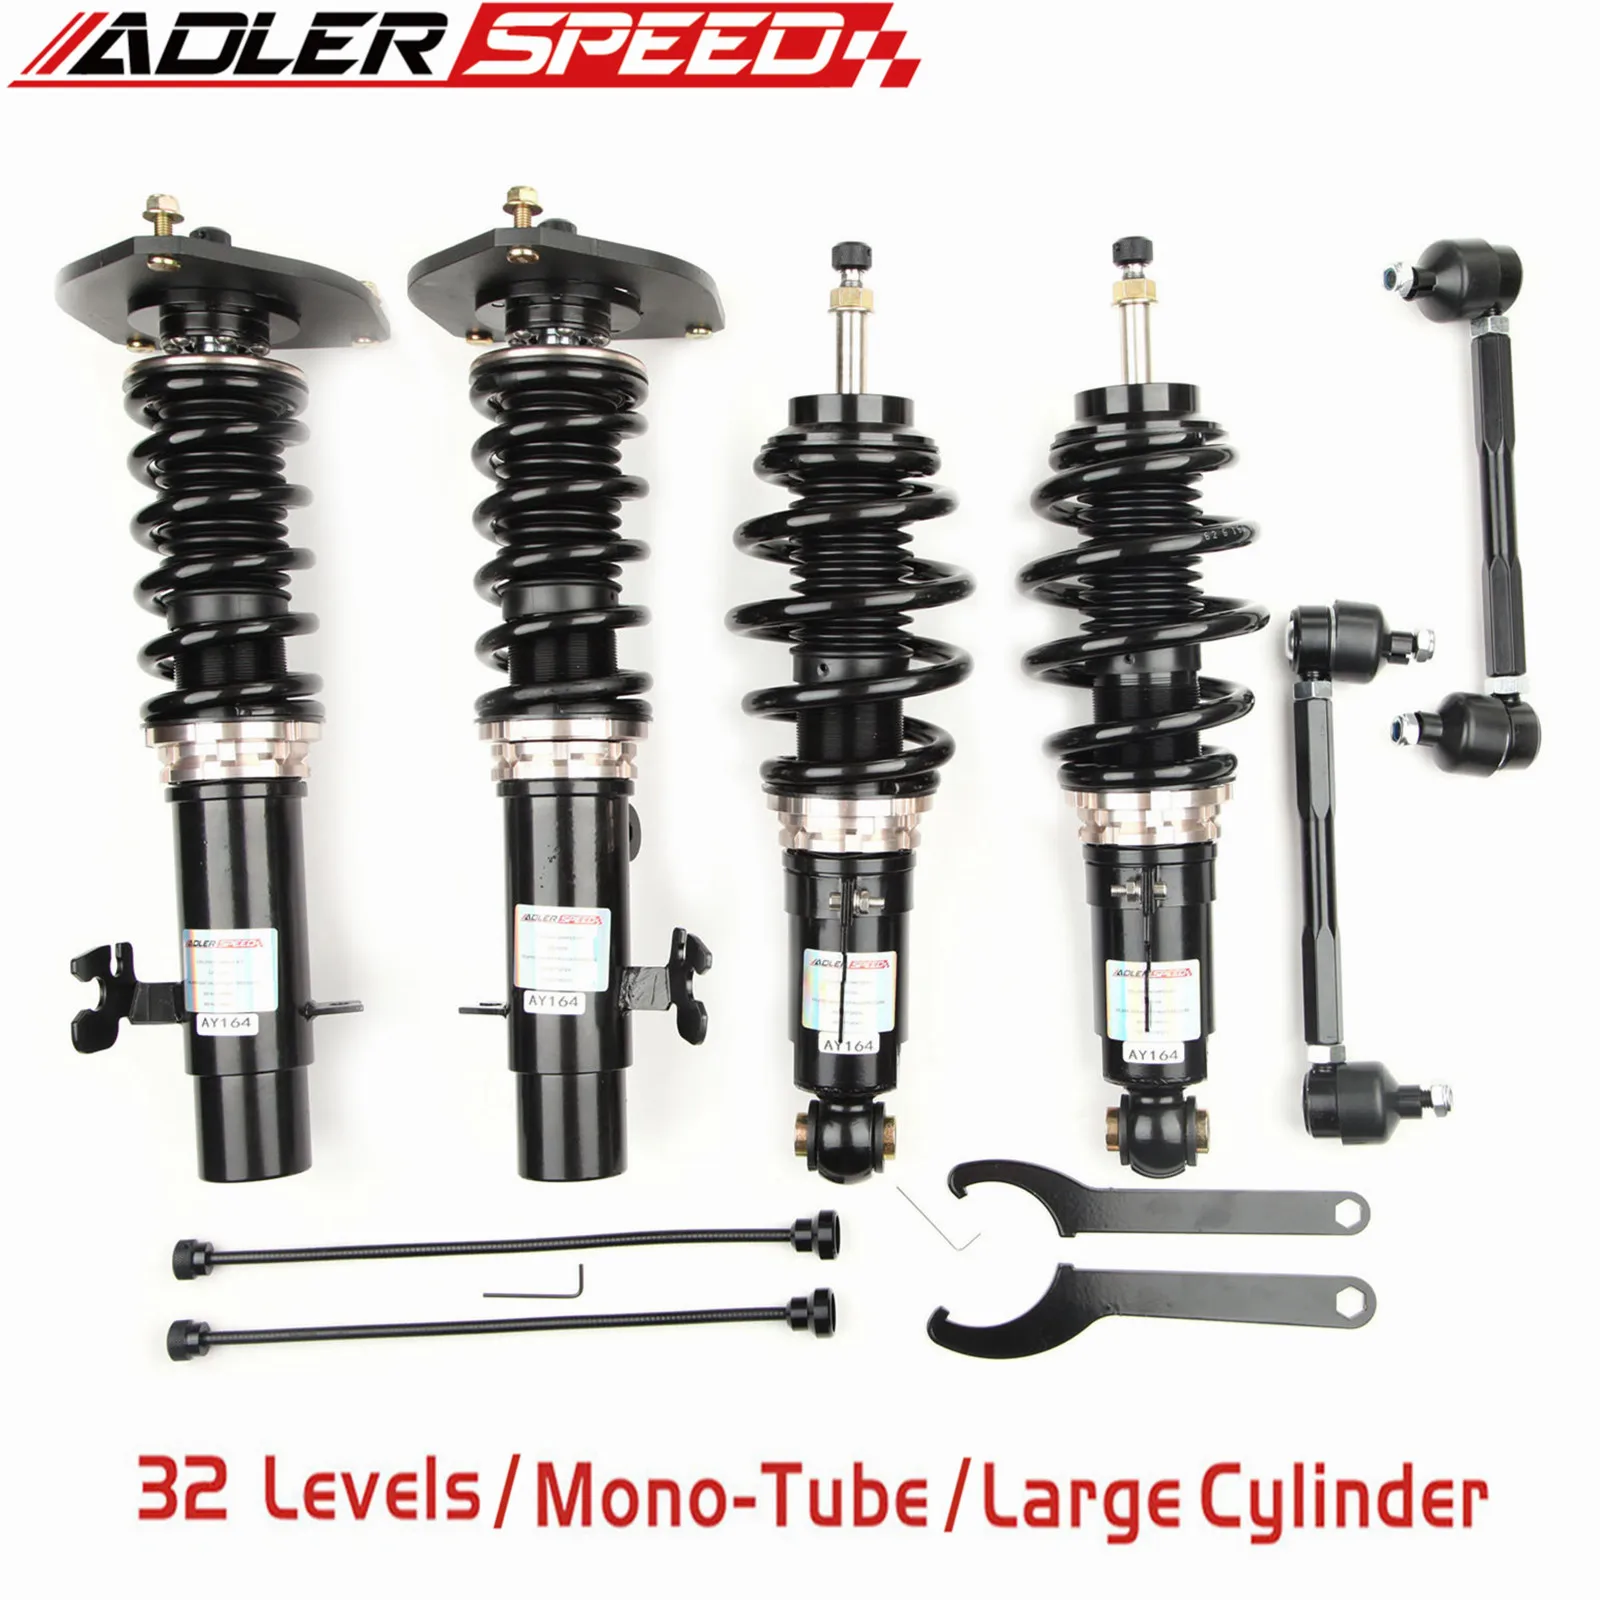 

ADLERSPEED 32 Way Mono Tube Coilovers Suspension Kit For 2002-2008 MINI COOPER / S R50 R52 R53